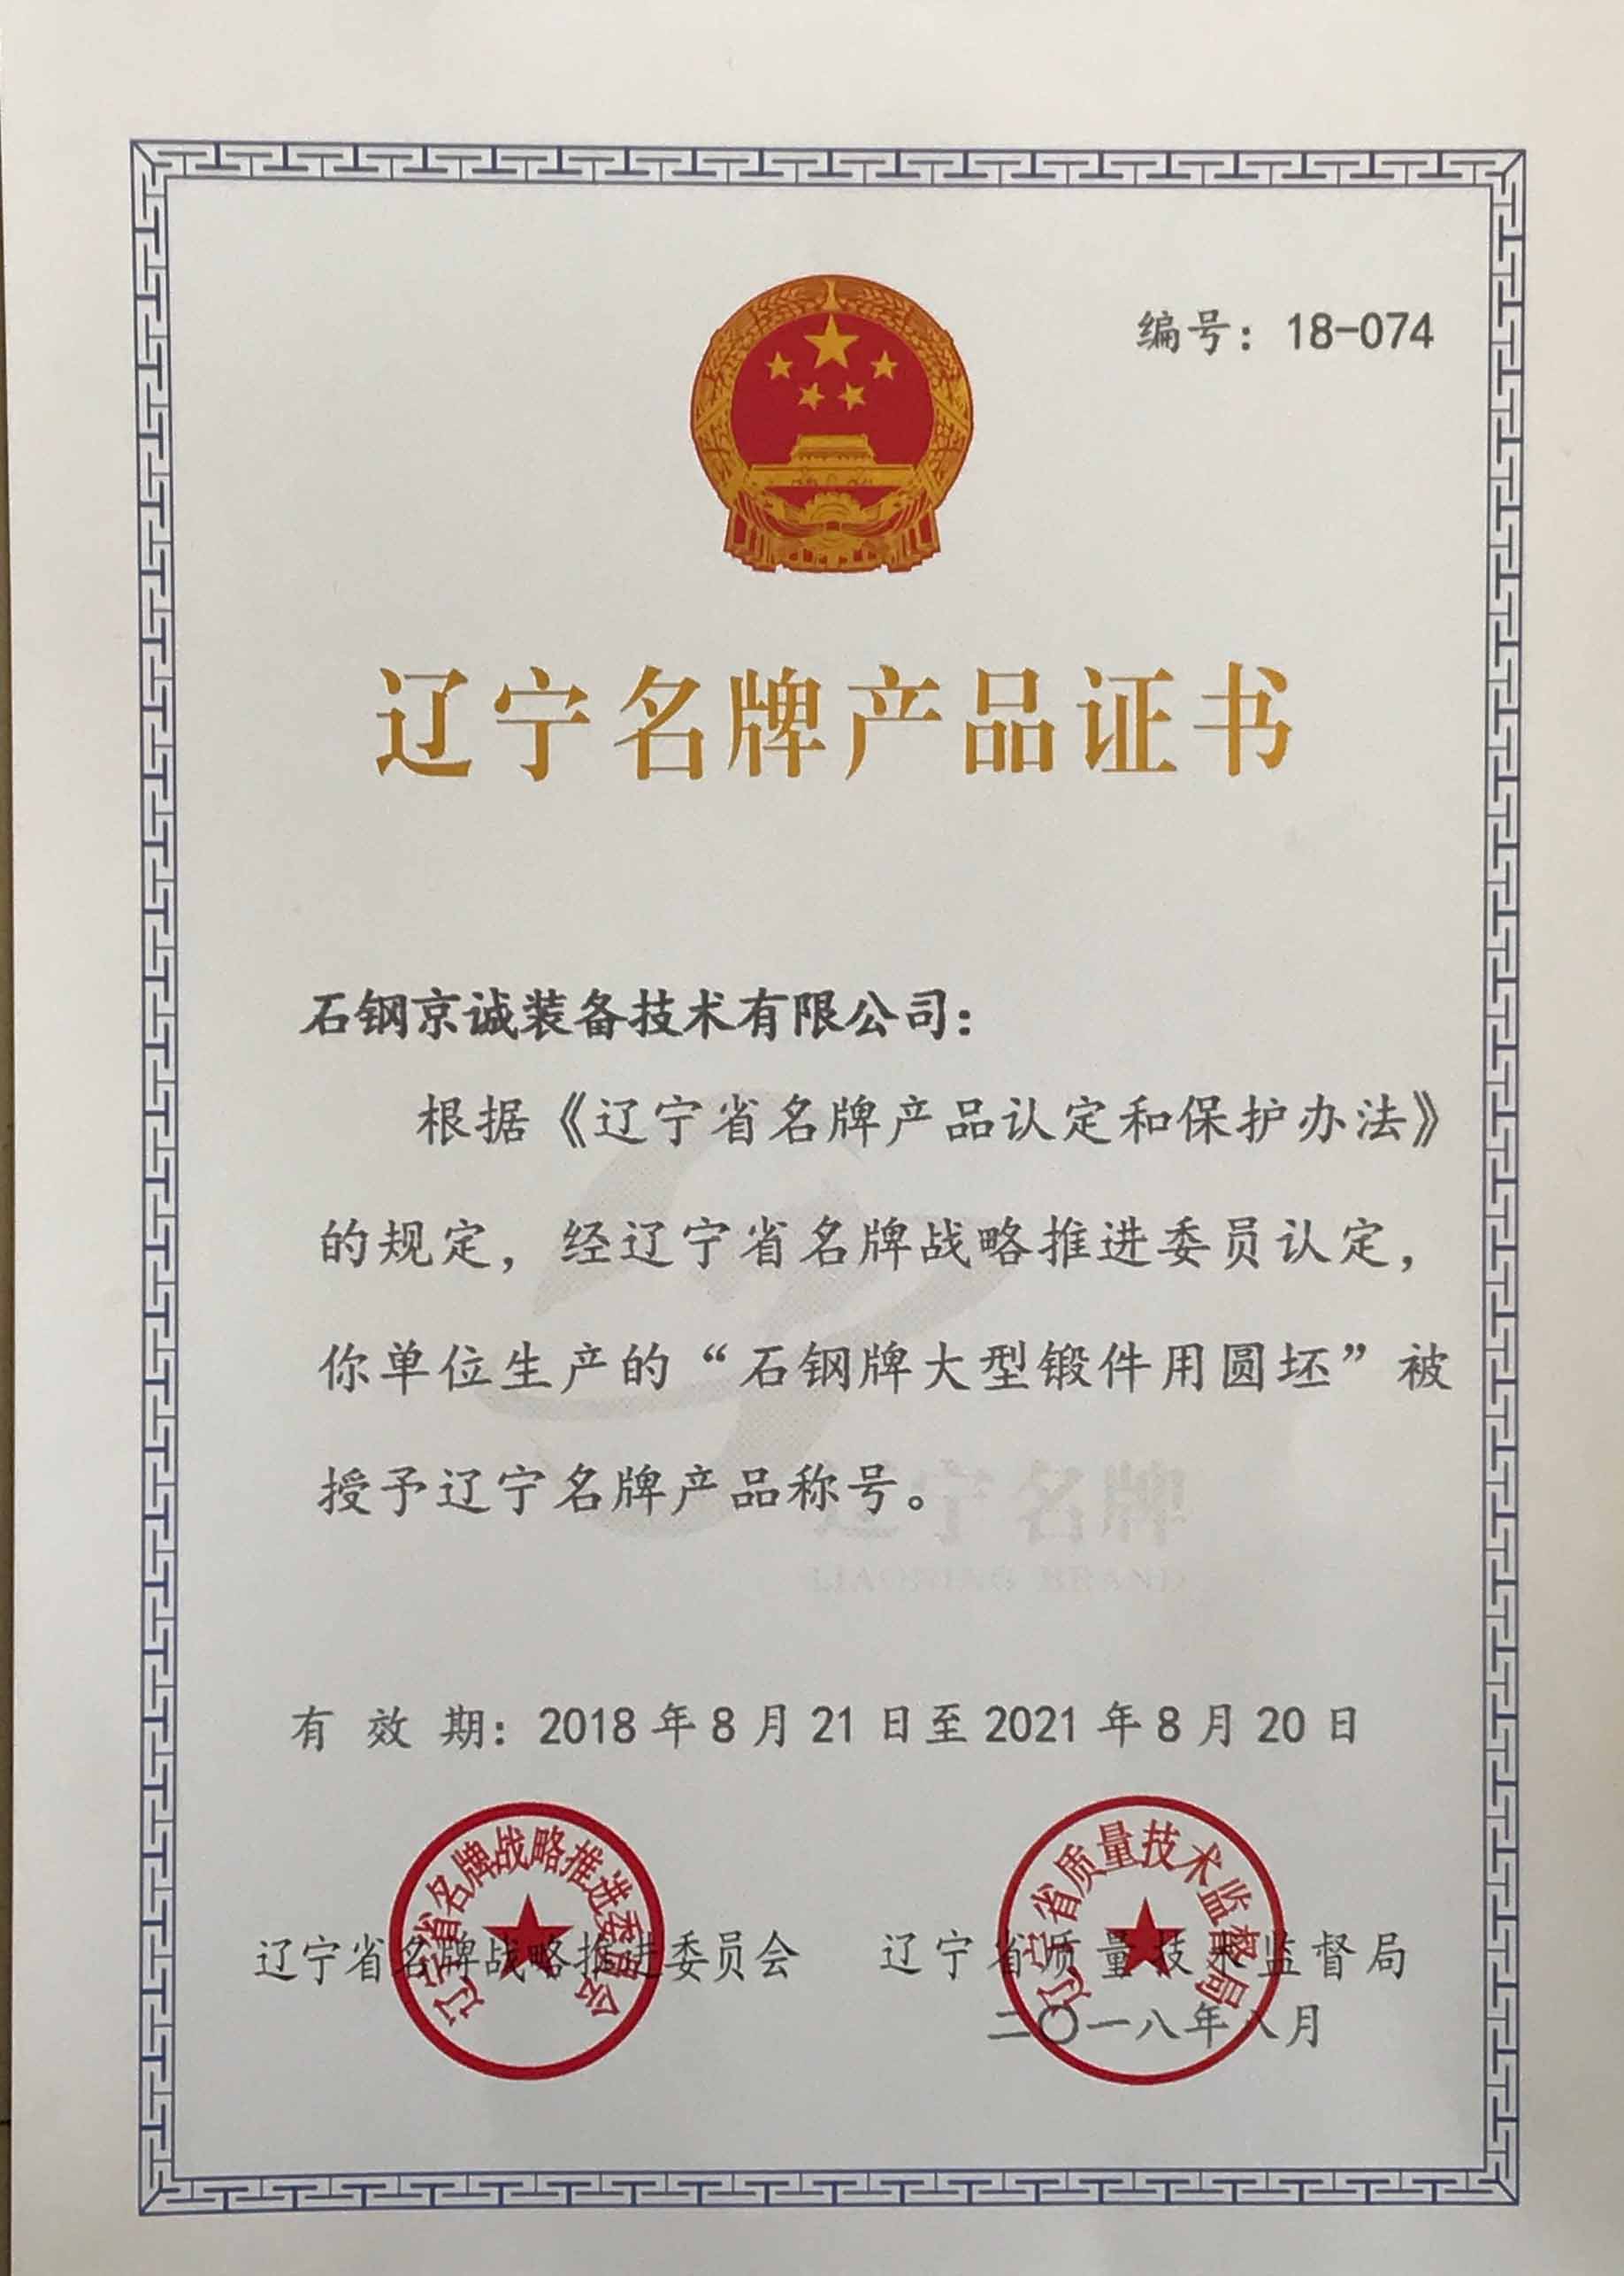 <b>Liaoning Famous Brand Product Certificate</b>